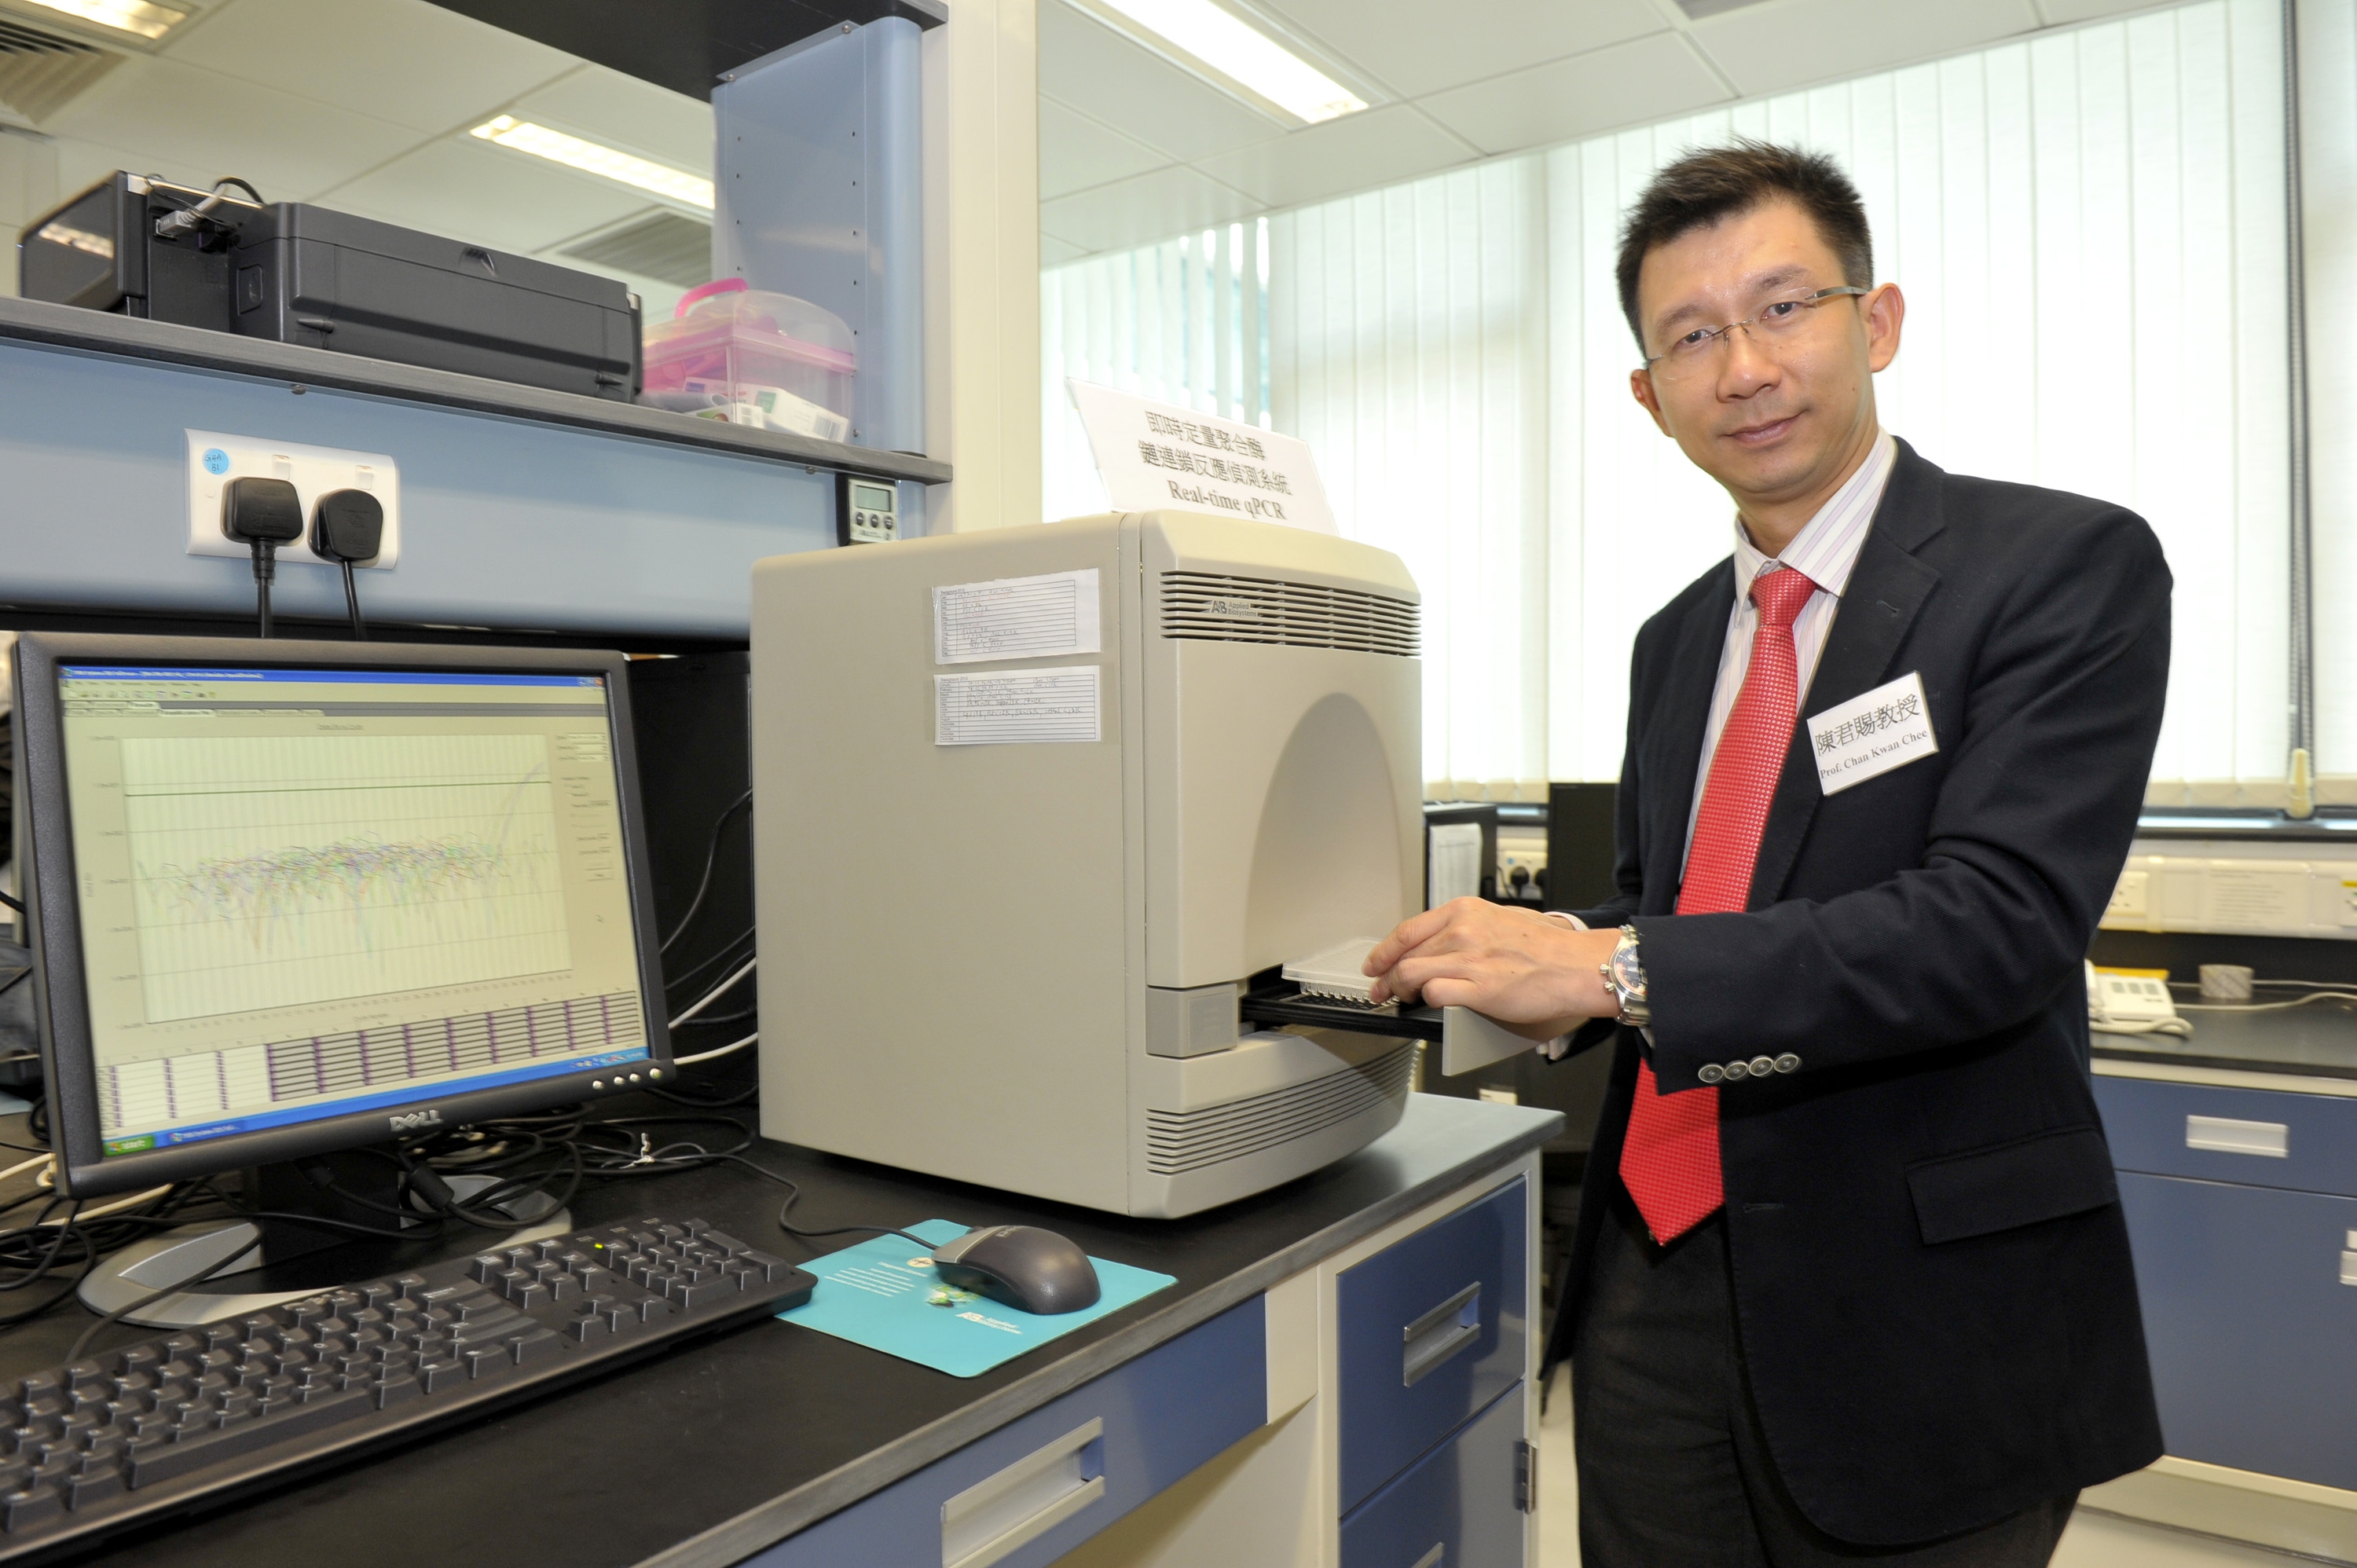 Prof. Allen K.C. Chan introduces the Real time q-PCR machine which allows screening of around hundred blood samples at one time and delivers the fast results within 2 hours